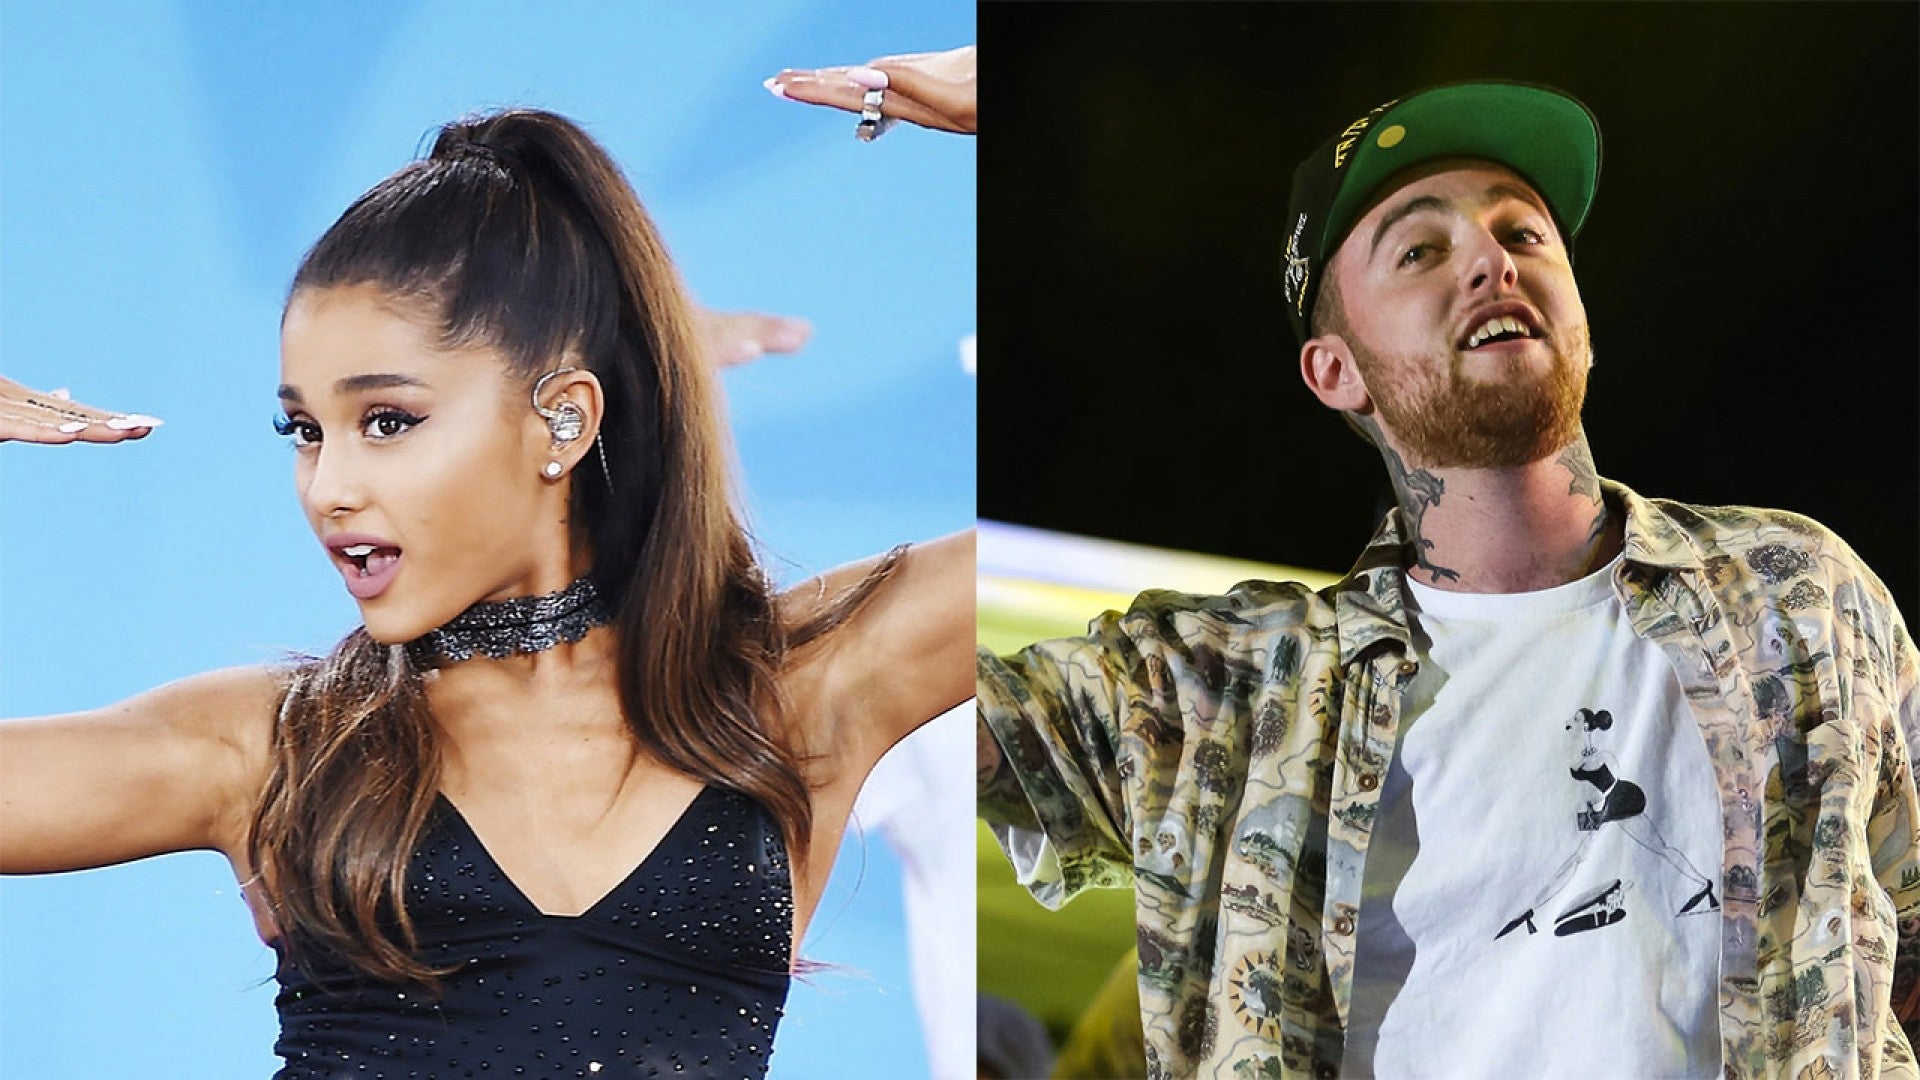 Ariana Grande Gets New Tattoos With Mac Miller Ahead Of Vmas See The Pics Entertainment Tonight